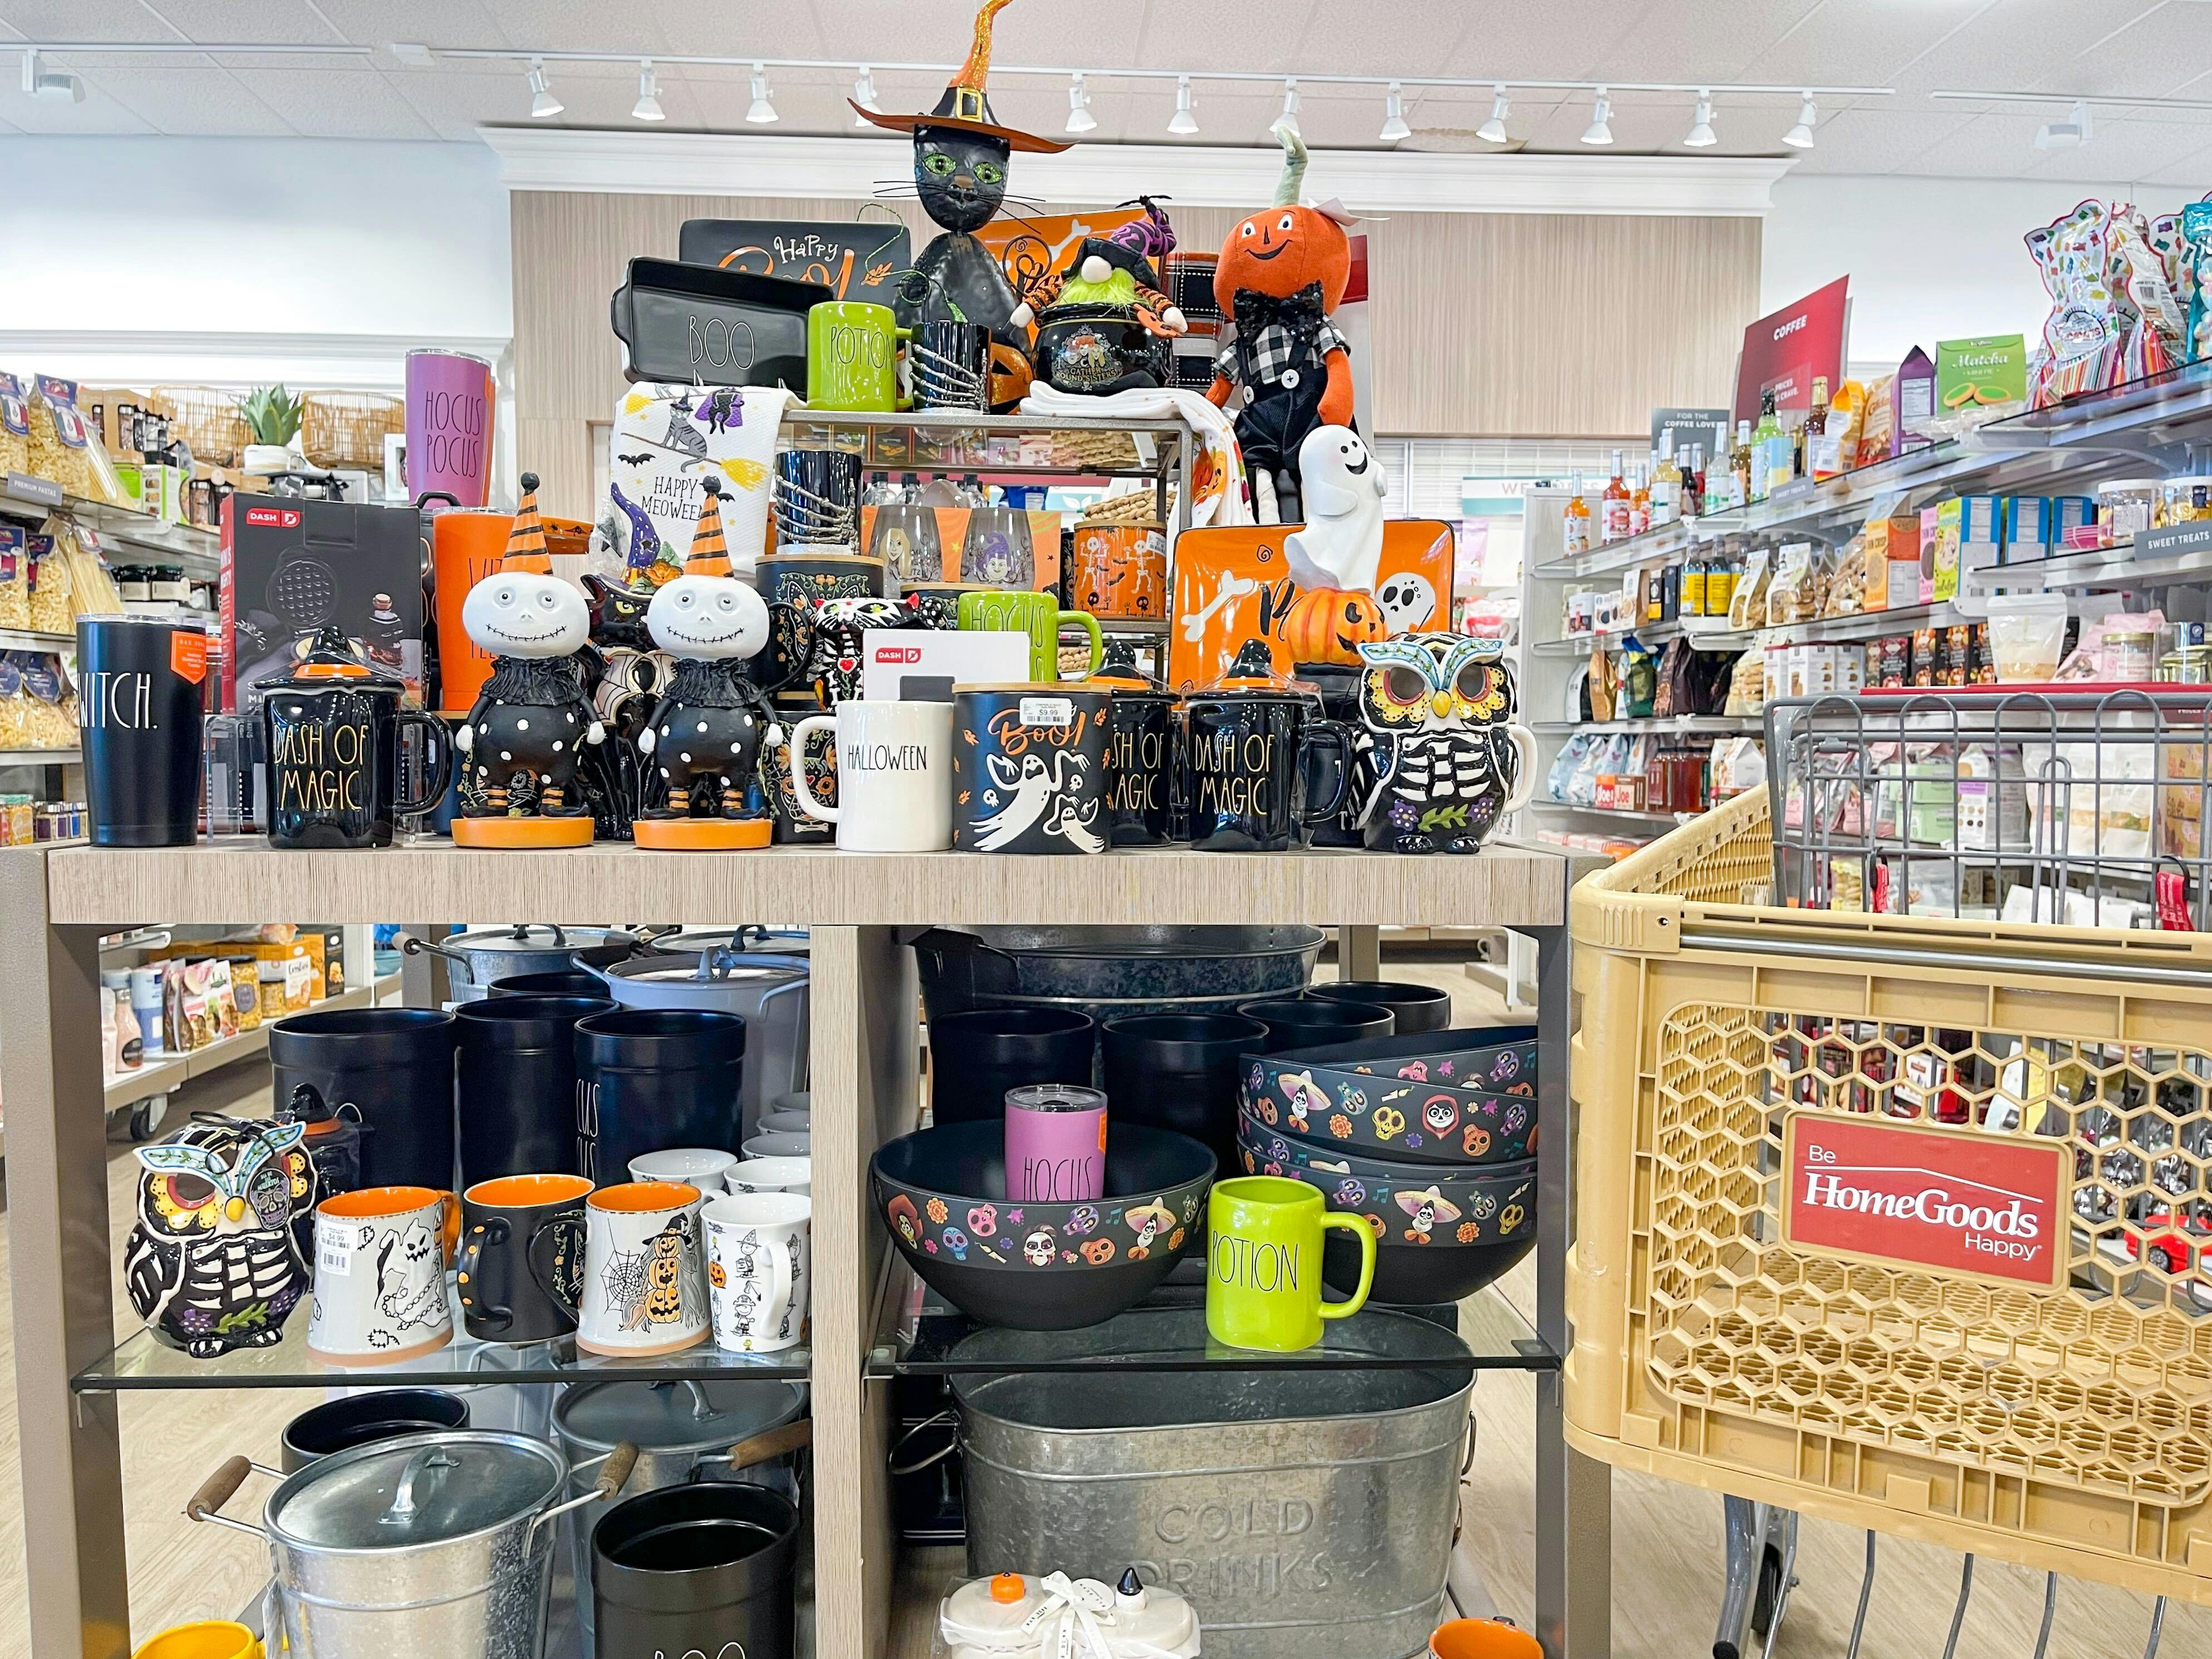 Halloween Decorations Have Hit HomeGoods, Including Hocus Pocus, Rae Dunn, and More